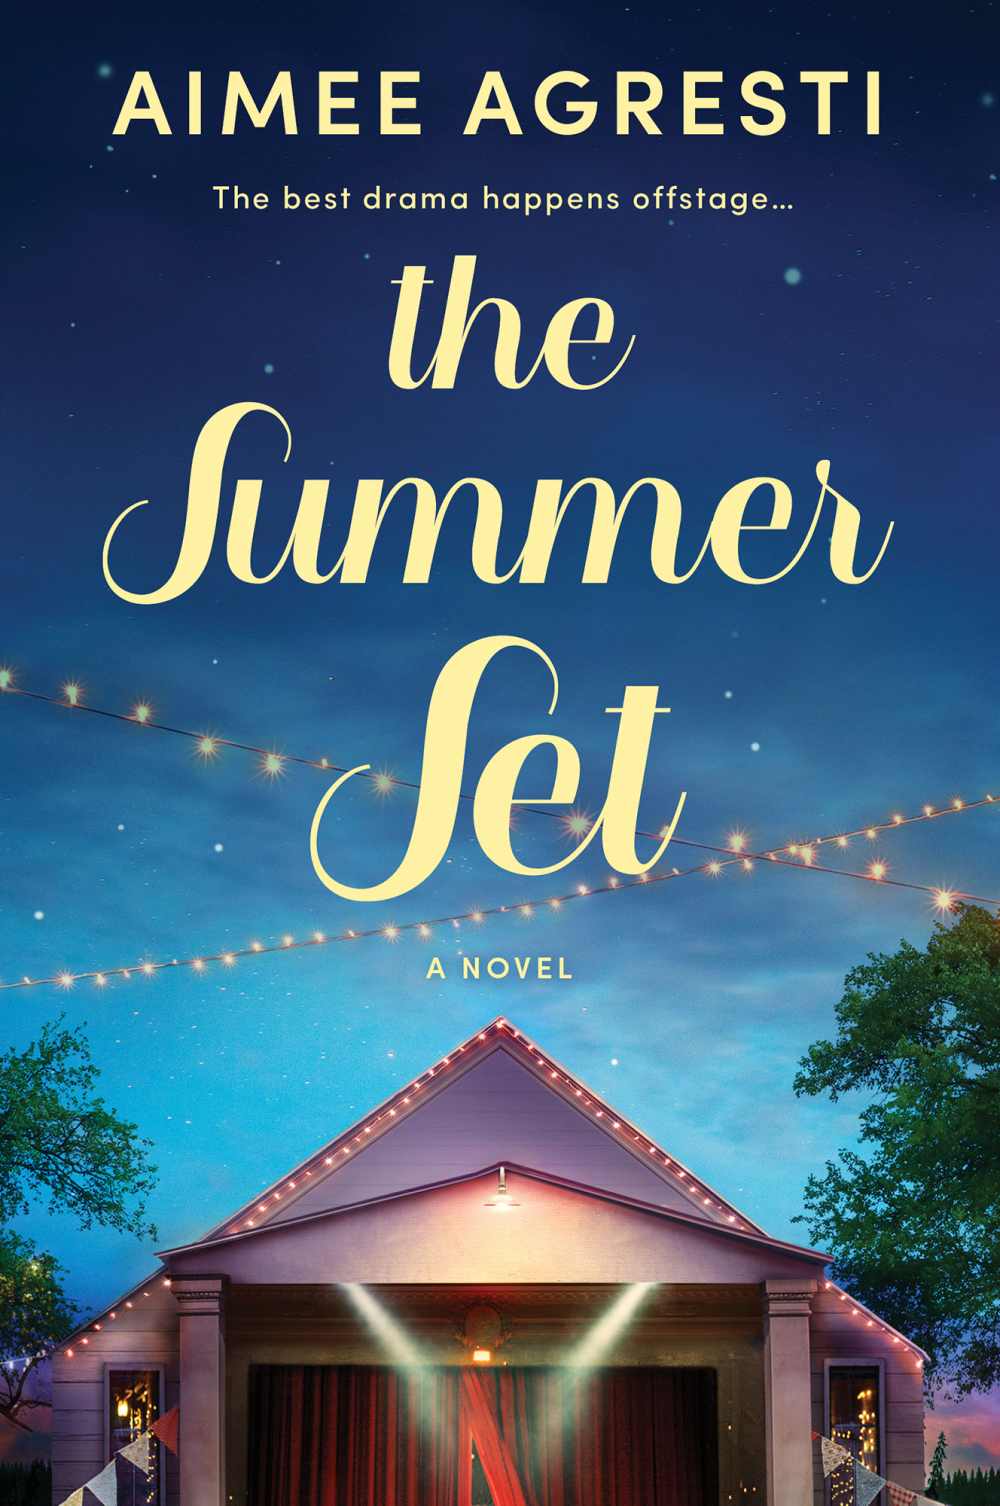 Aimee Agresti Shares Exclusive Excerpt From Her Novel ‘The Summer Set